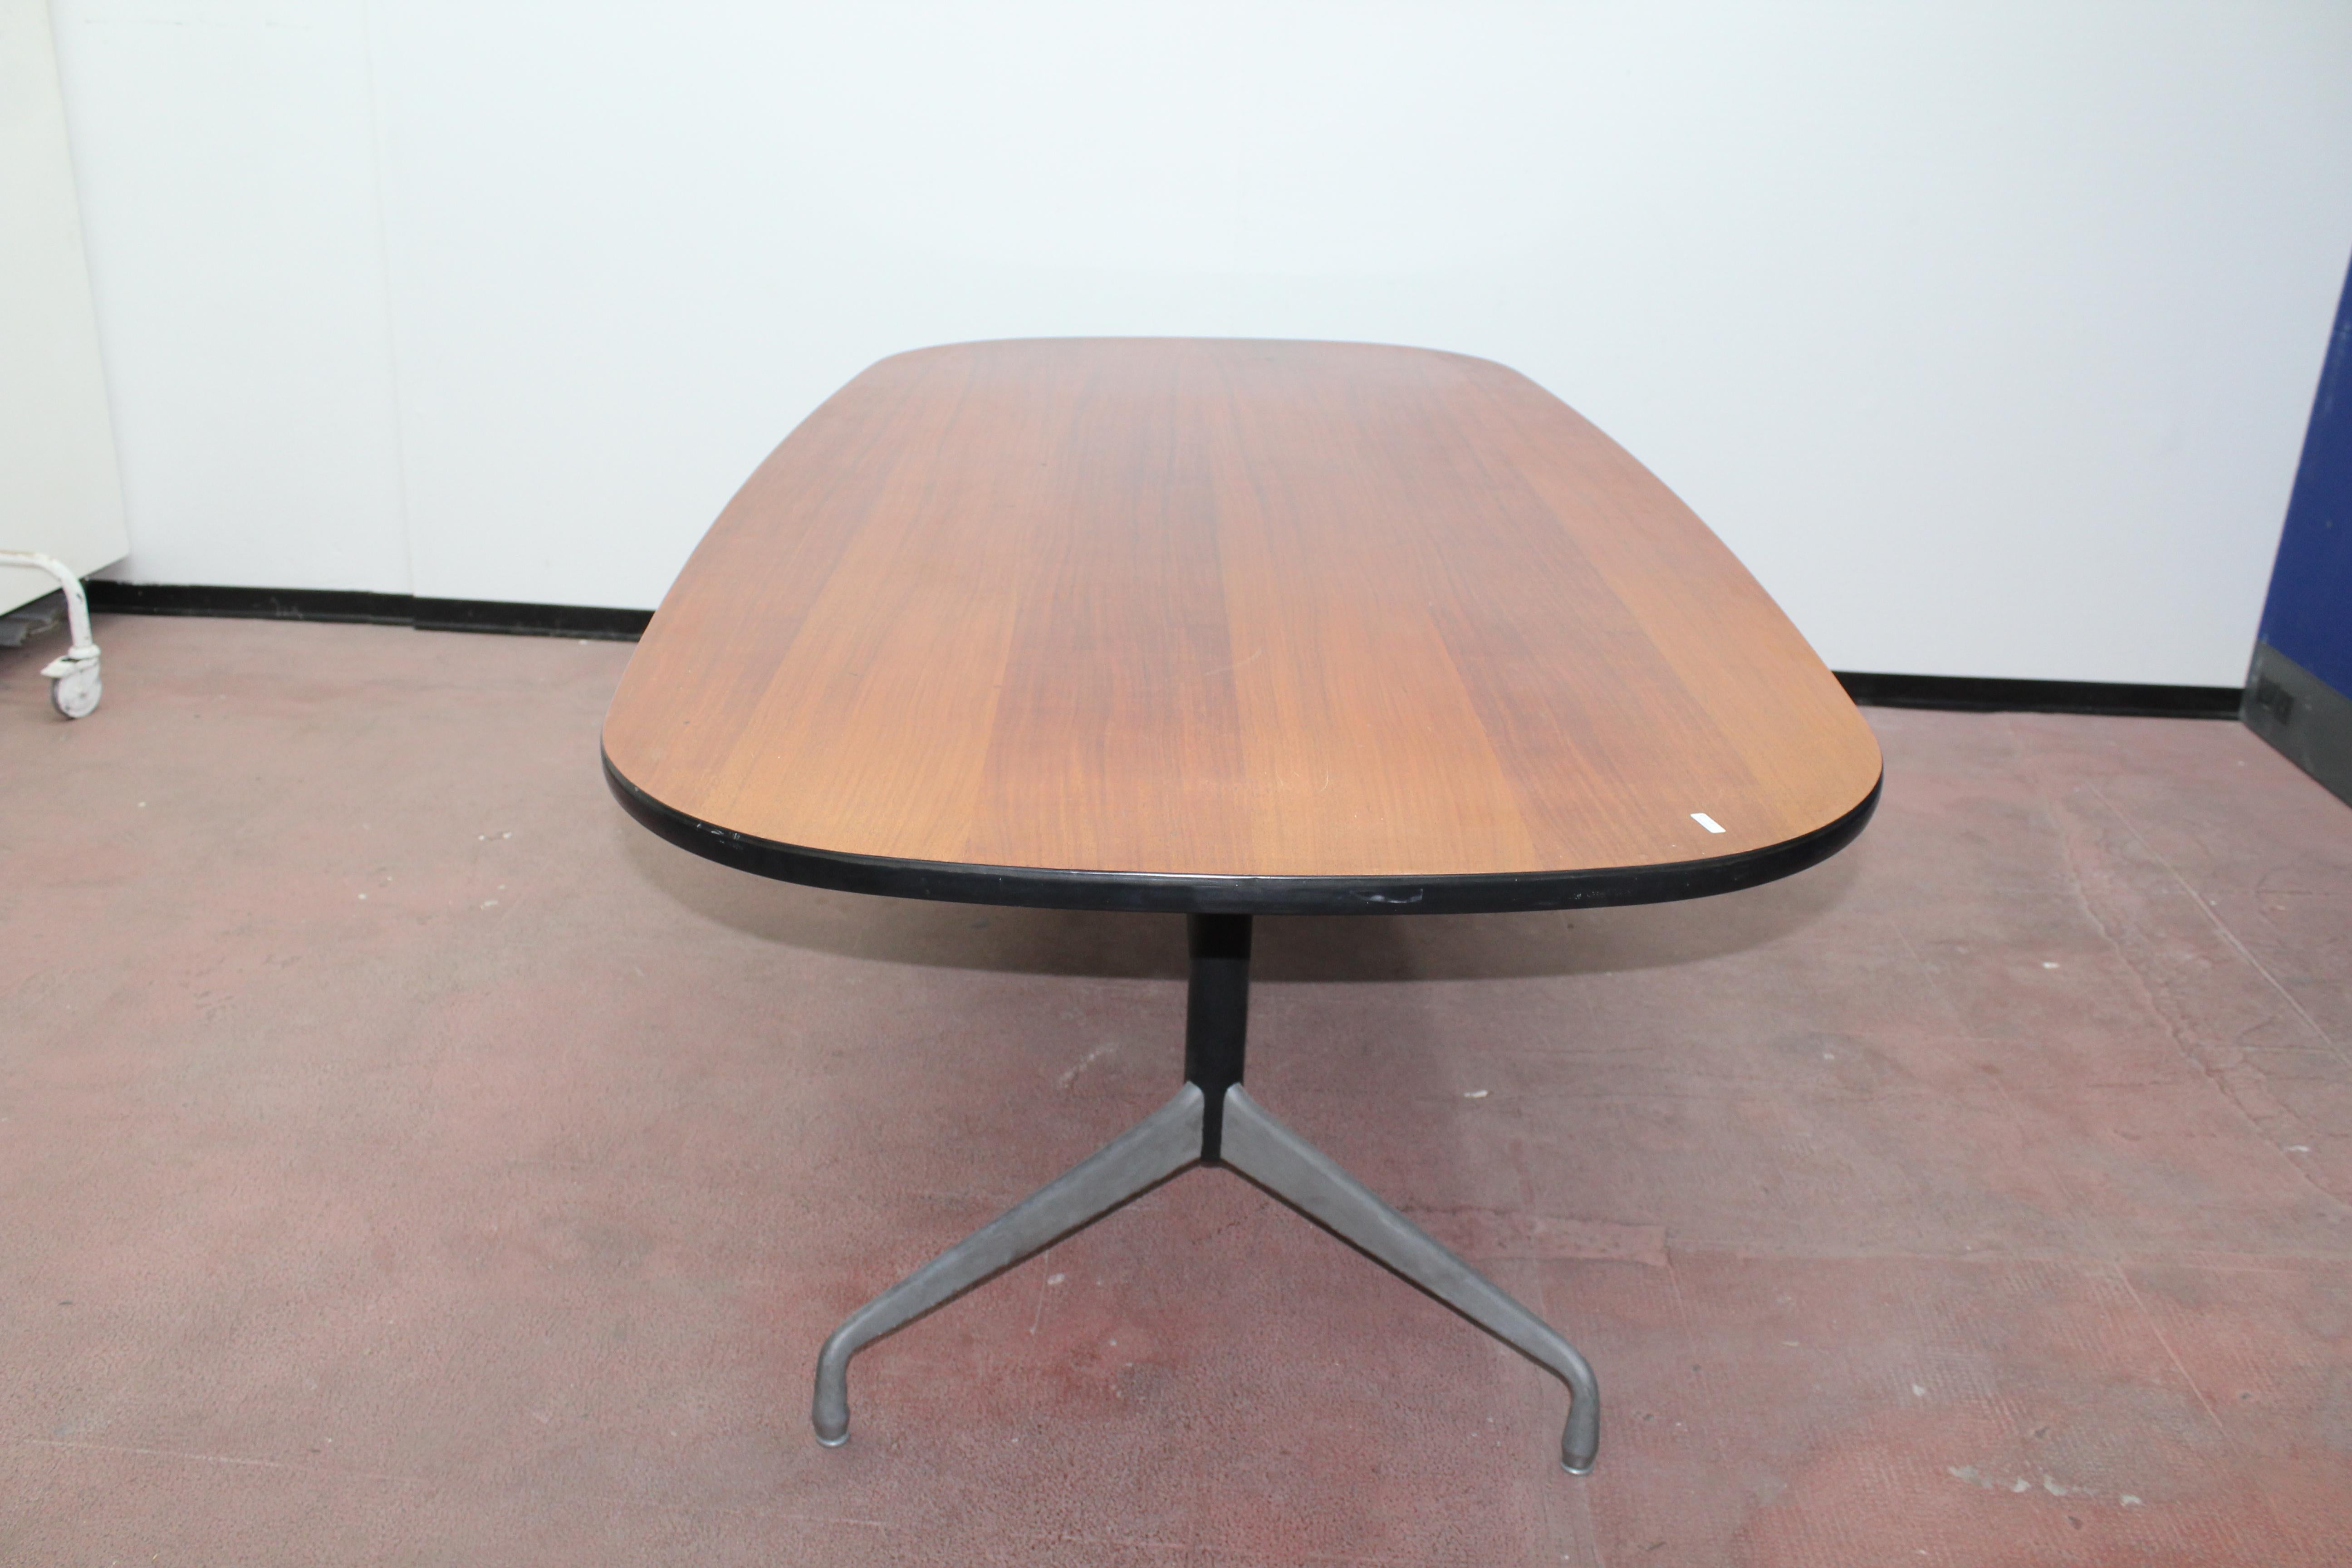 20th Century Modern Ashwood Conference Table Charles Eames 60s 2